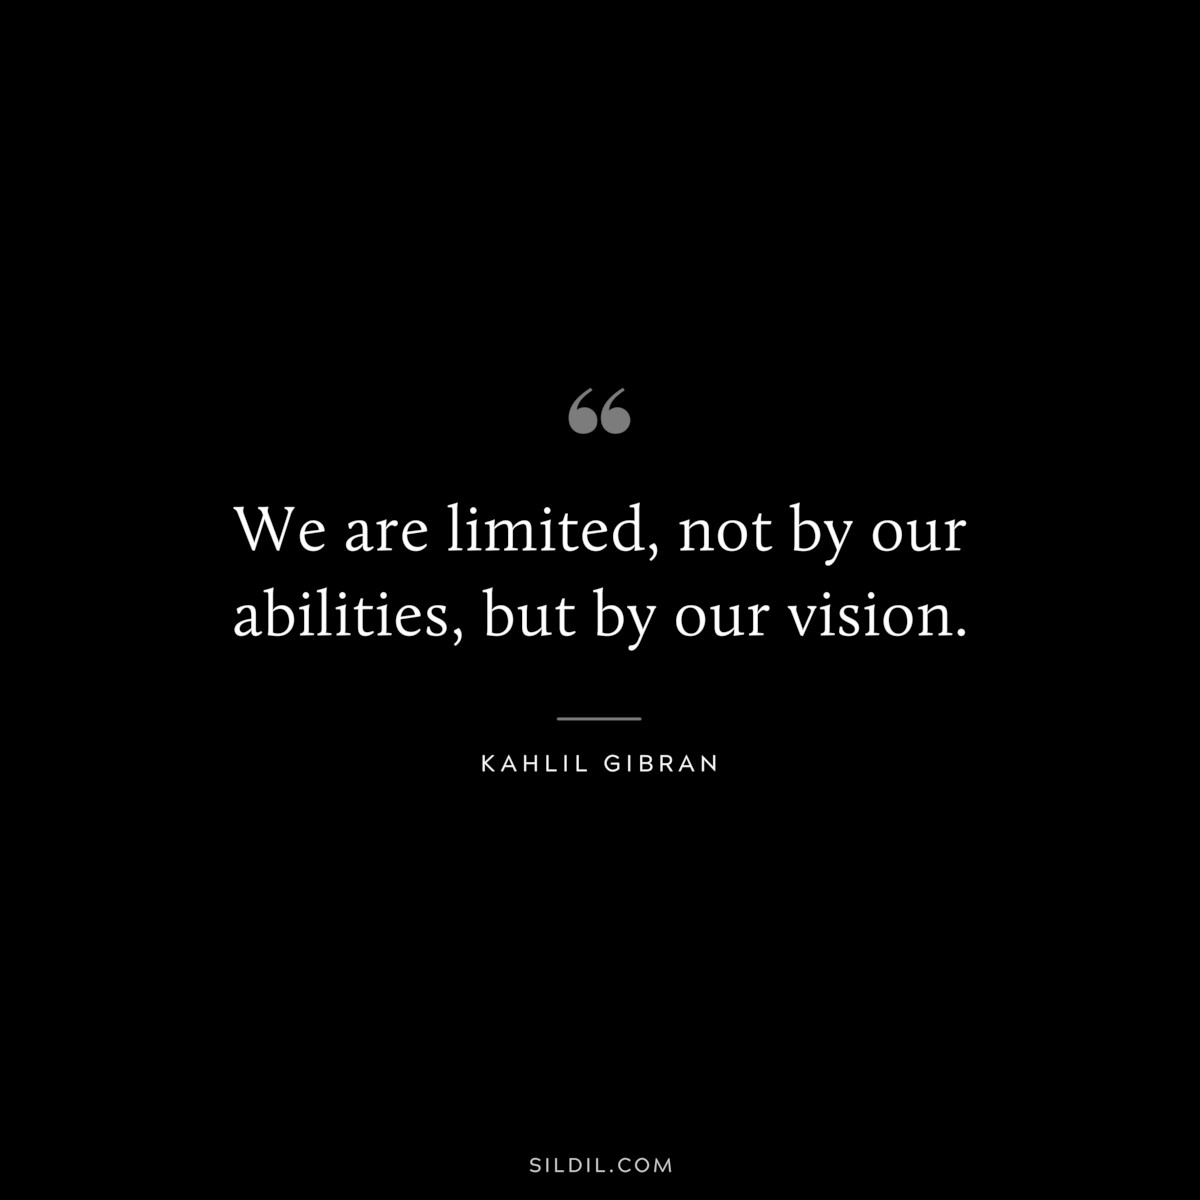 We are limited, not by our abilities, but by our vision. ― Kahlil Gibran